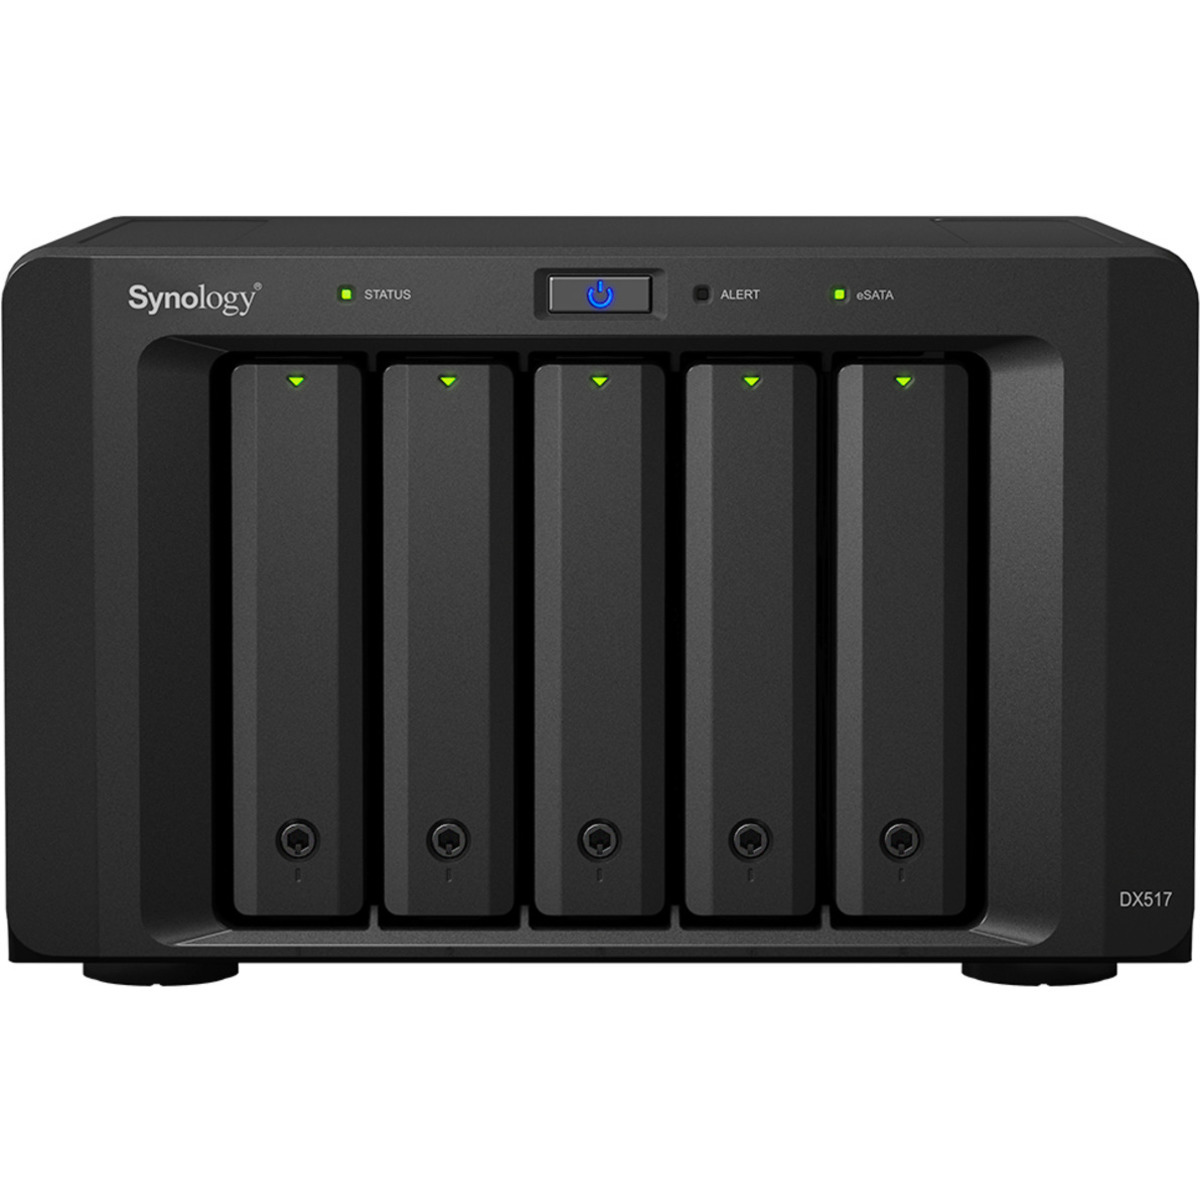 buy $1210 Synology DX517 20tb Desktop Expansion Enclosure 5x4000gb Western Digital Blue WD40EZRZ 3.5 5400rpm SATA 6Gb/s HDD CONSUMER Class Drives Installed - Burn-In Tested - nas headquarters buy network attached storage server device das new raid-5 free shipping usa christmas new year holiday sale DX517